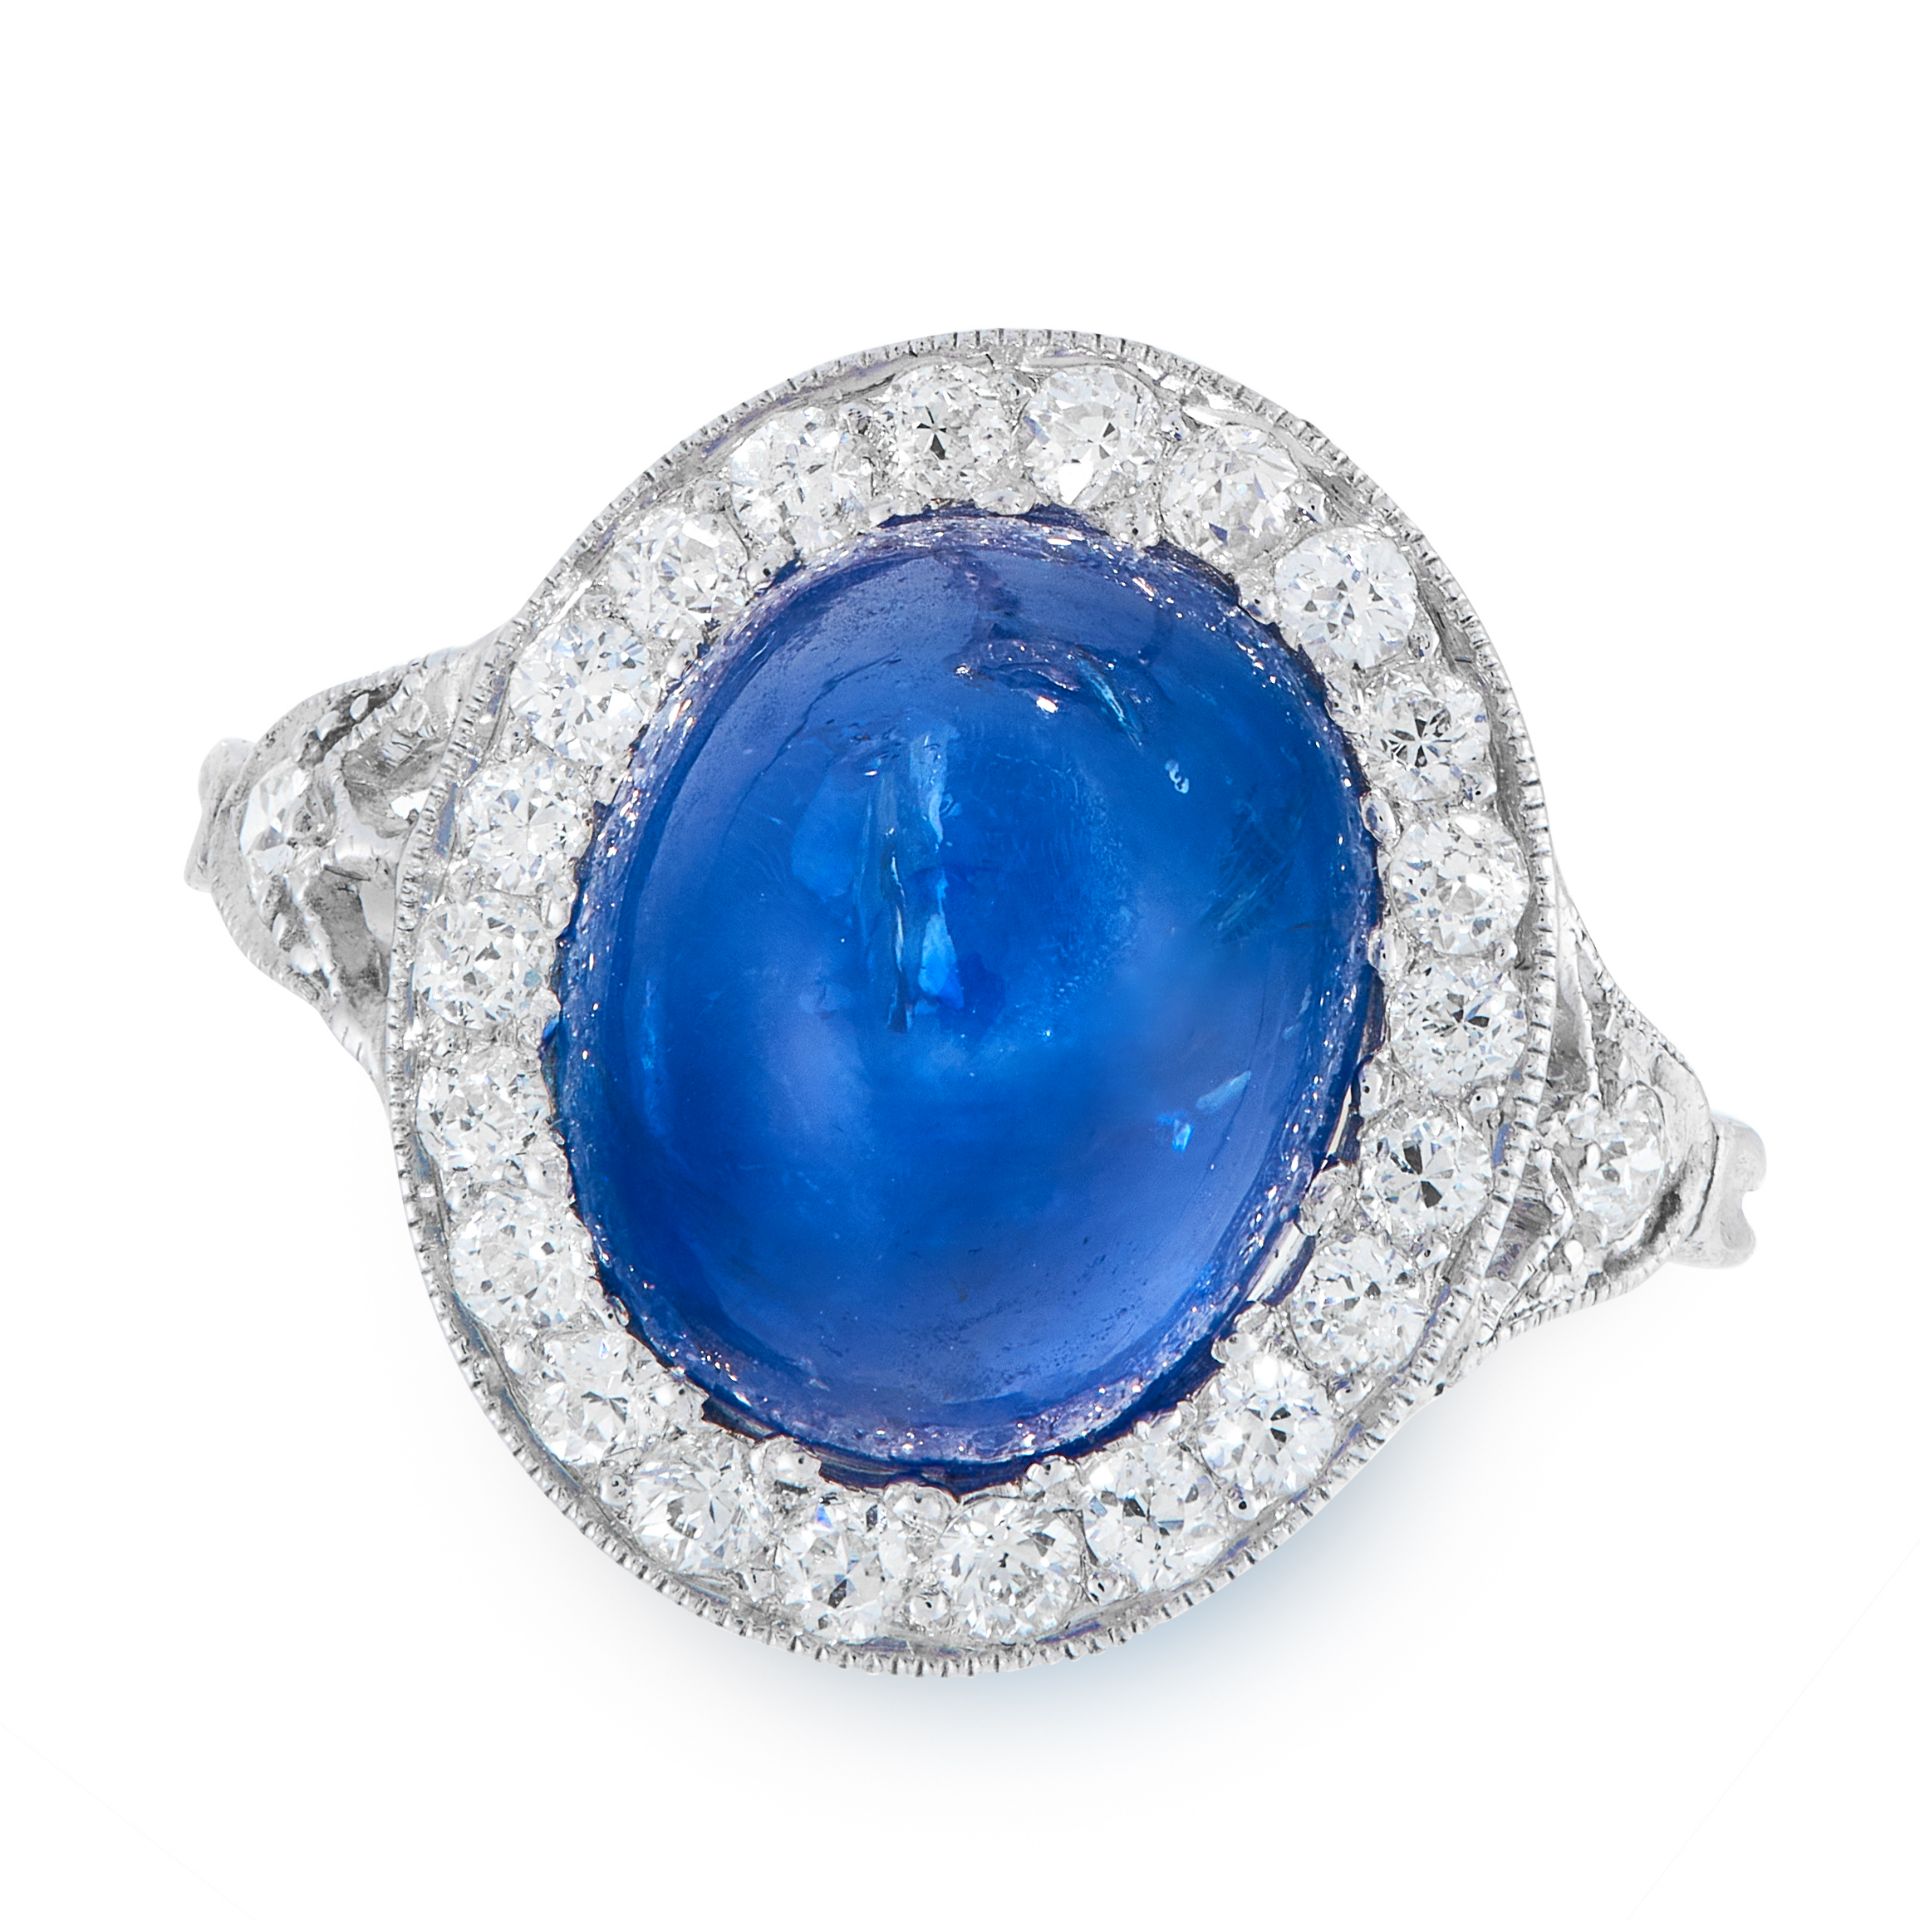 A SAPPHIRE AND DIAMOND DRESS RING in platinum, set with an oval cabochon blue sapphire of 8.49